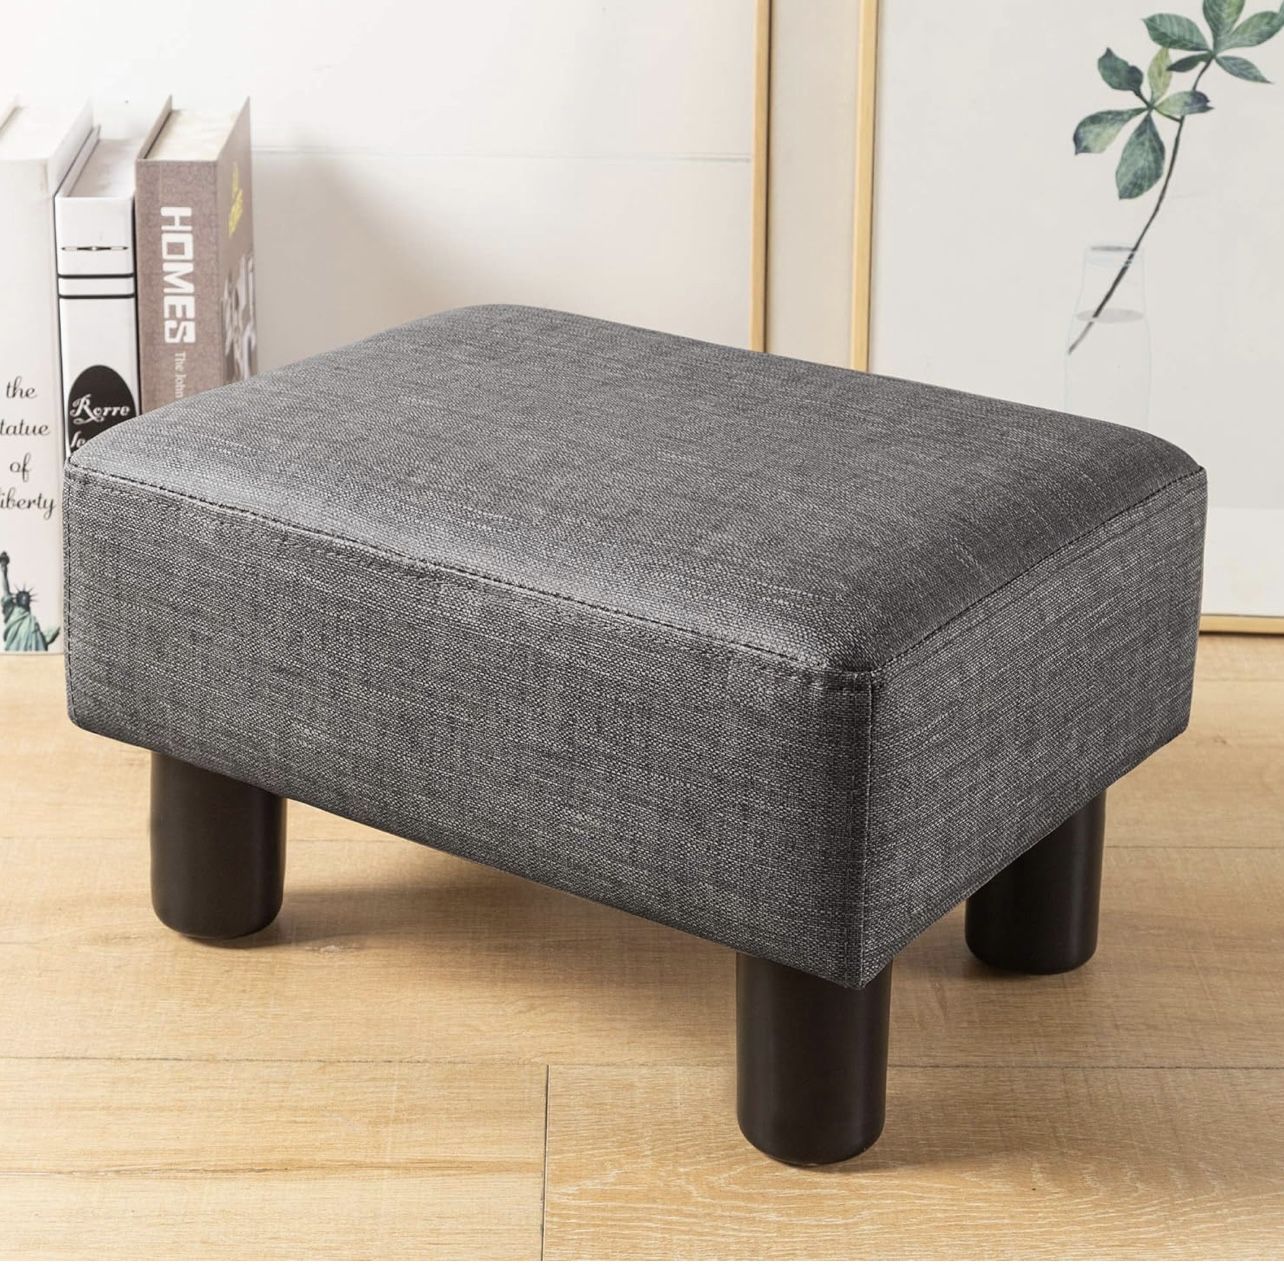 Modern Rectangle Footrest Small Step Stool Ottoman For Couch , Desk Office , Living Room , Gray 